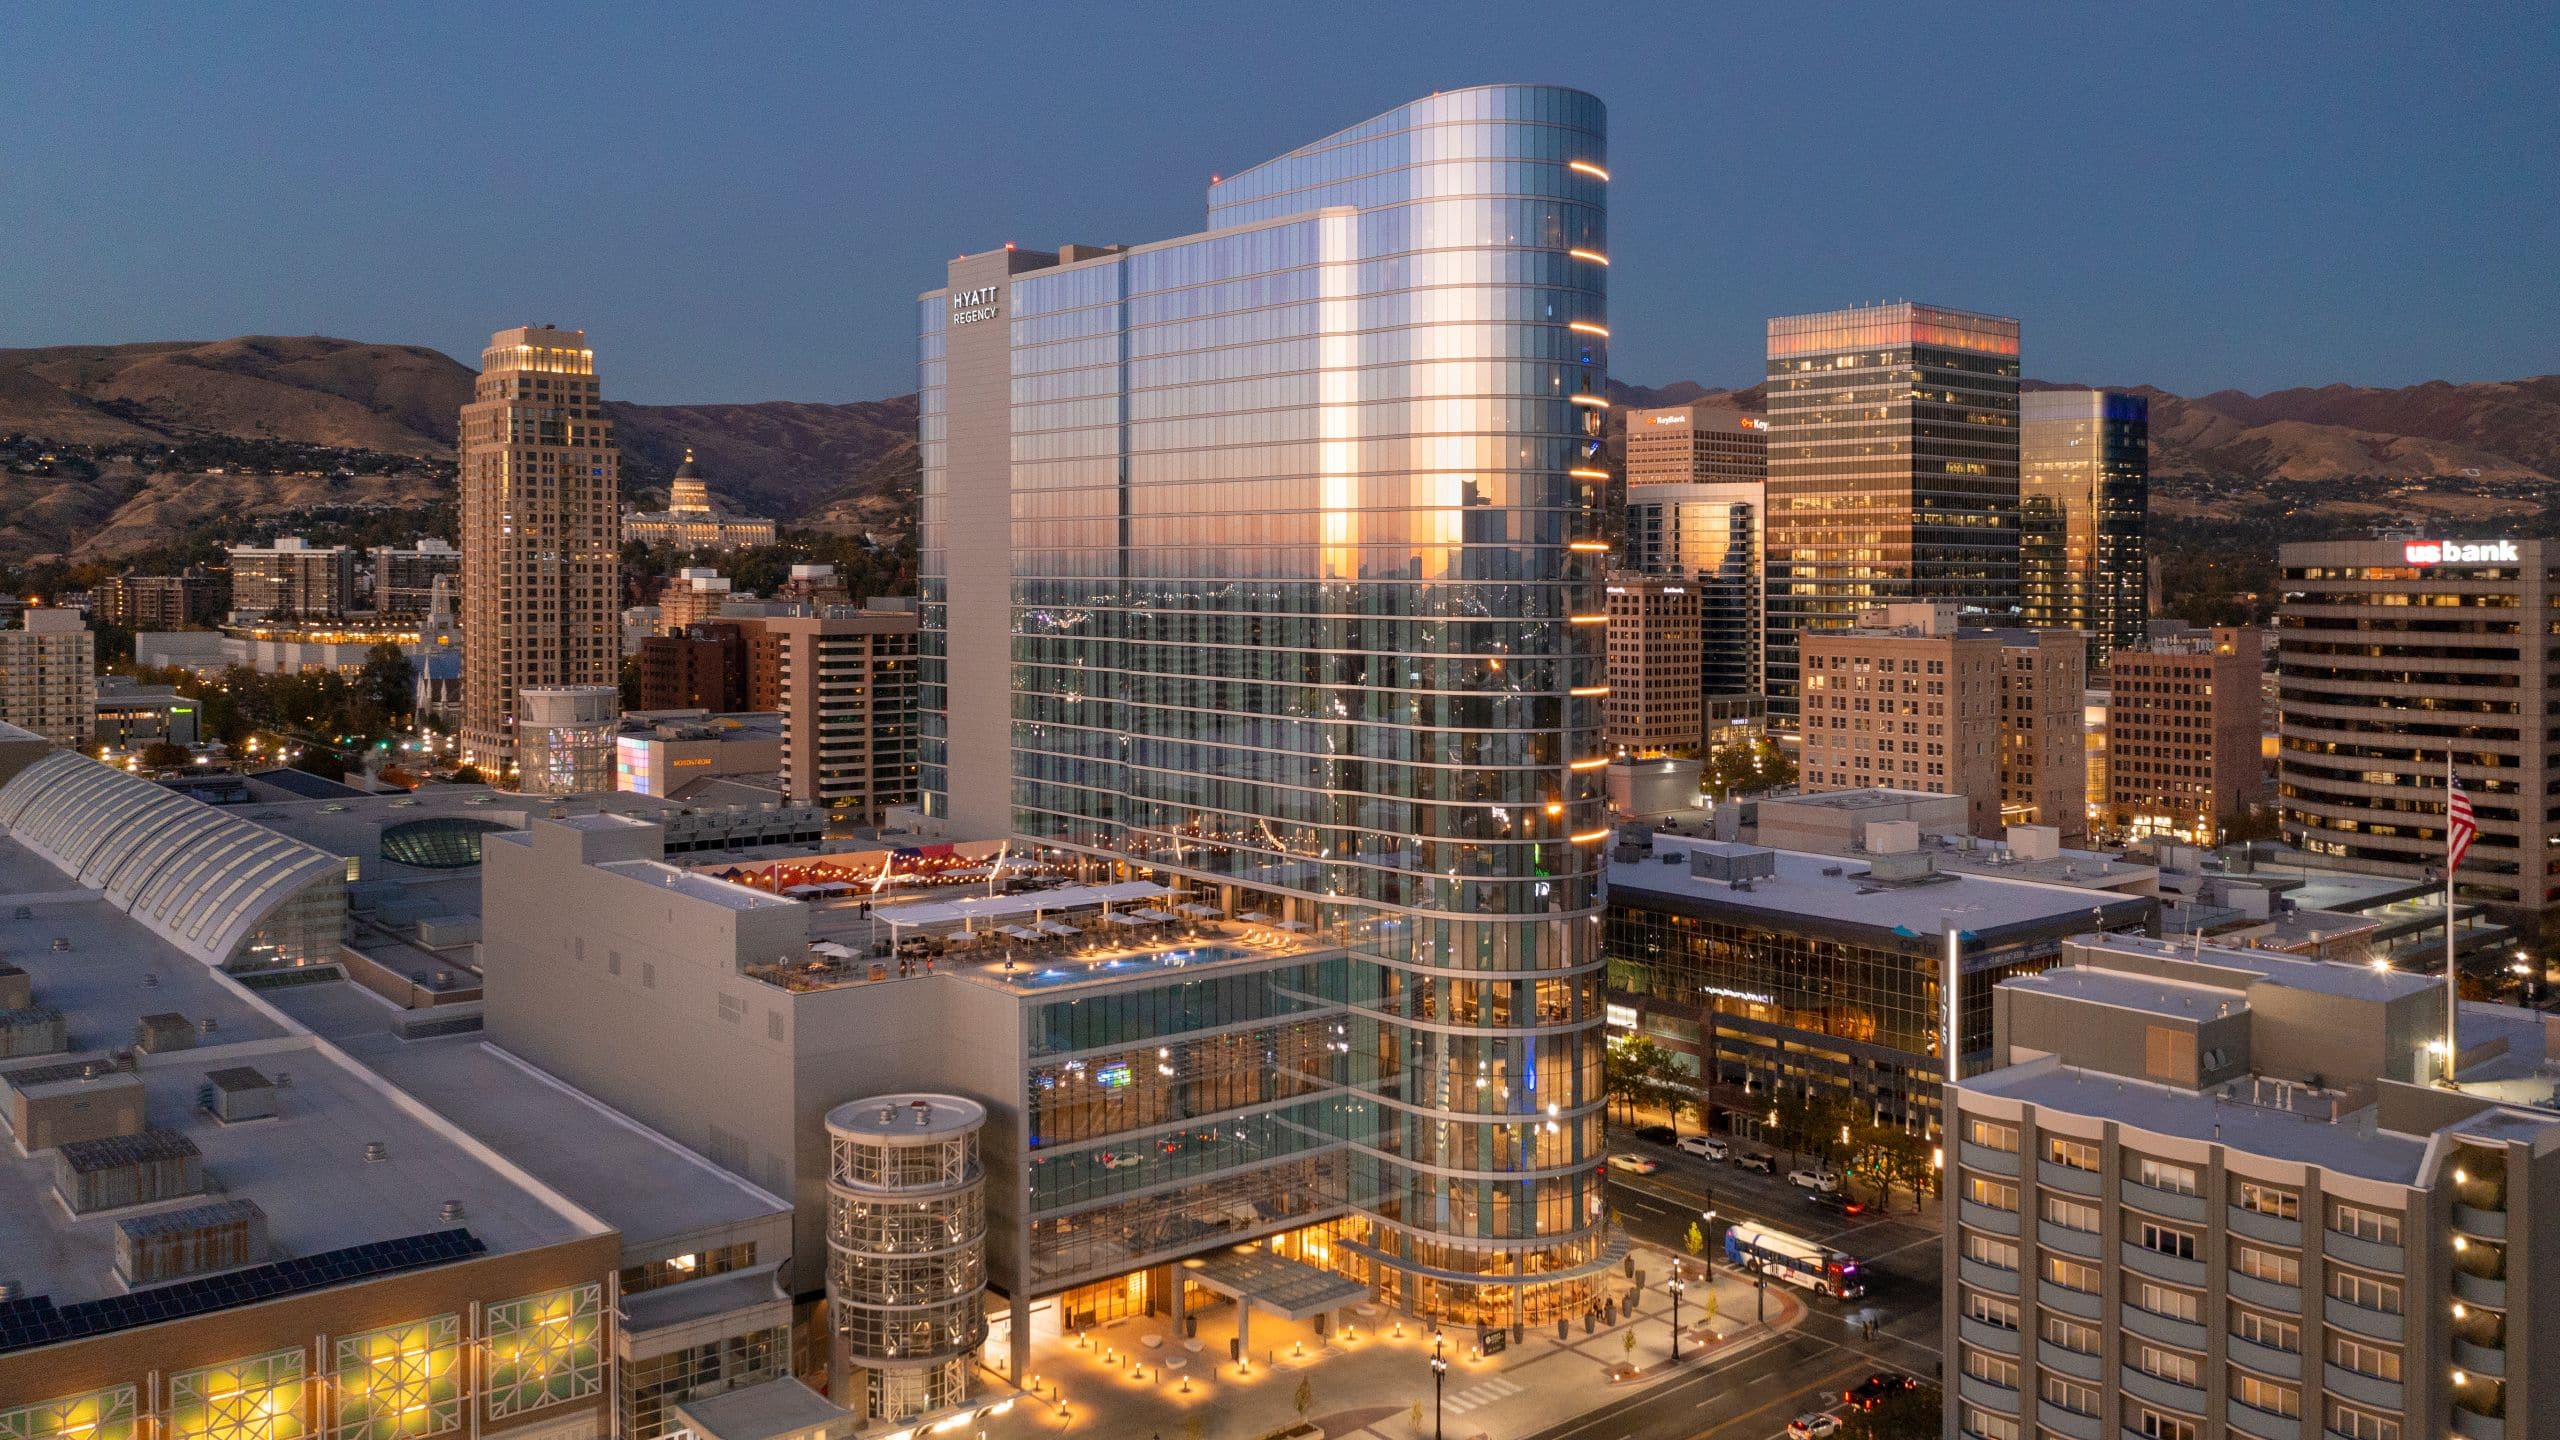 Salt Lake City Hotels, Restaurants, Events, Things to Do & Shopping